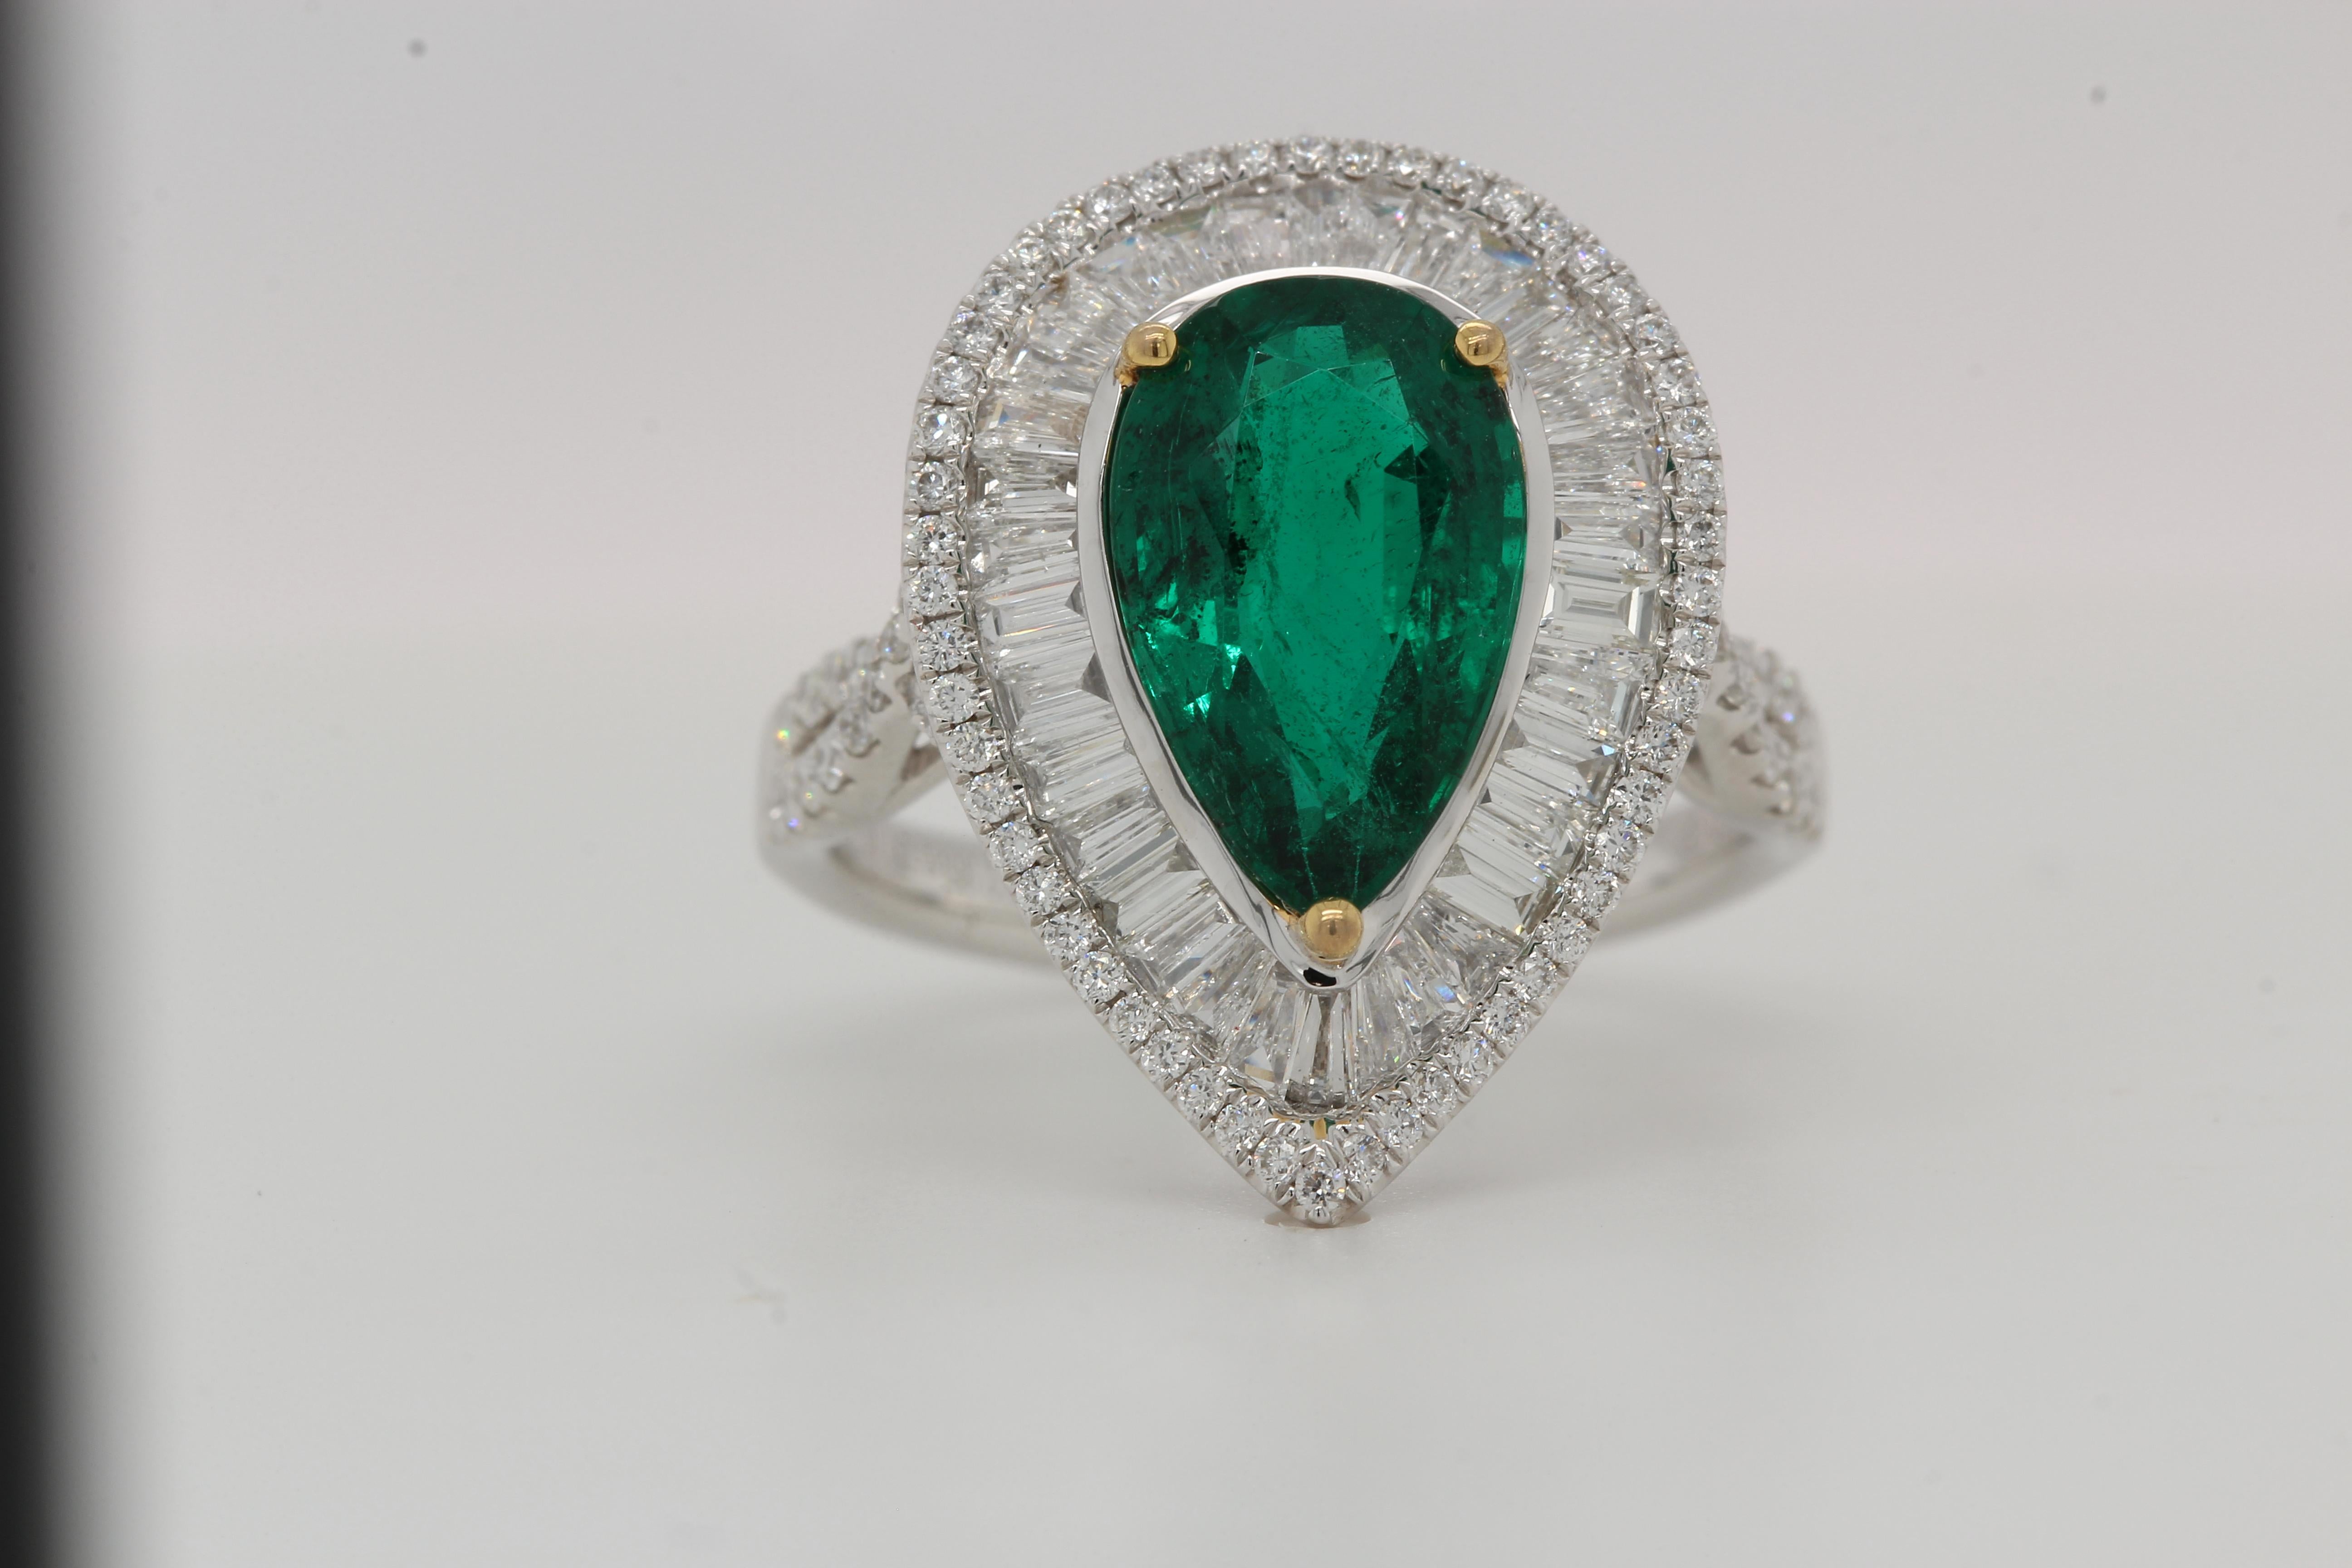 Graceful and elegant, our gorgeous flawless lush green emerald and diamond ring is a timeless symbol of love. A stunning 2.85 carat flawless lush green emerald pear sits set with dazzling white diamonds, making this one-of-a-kind piece a must-have